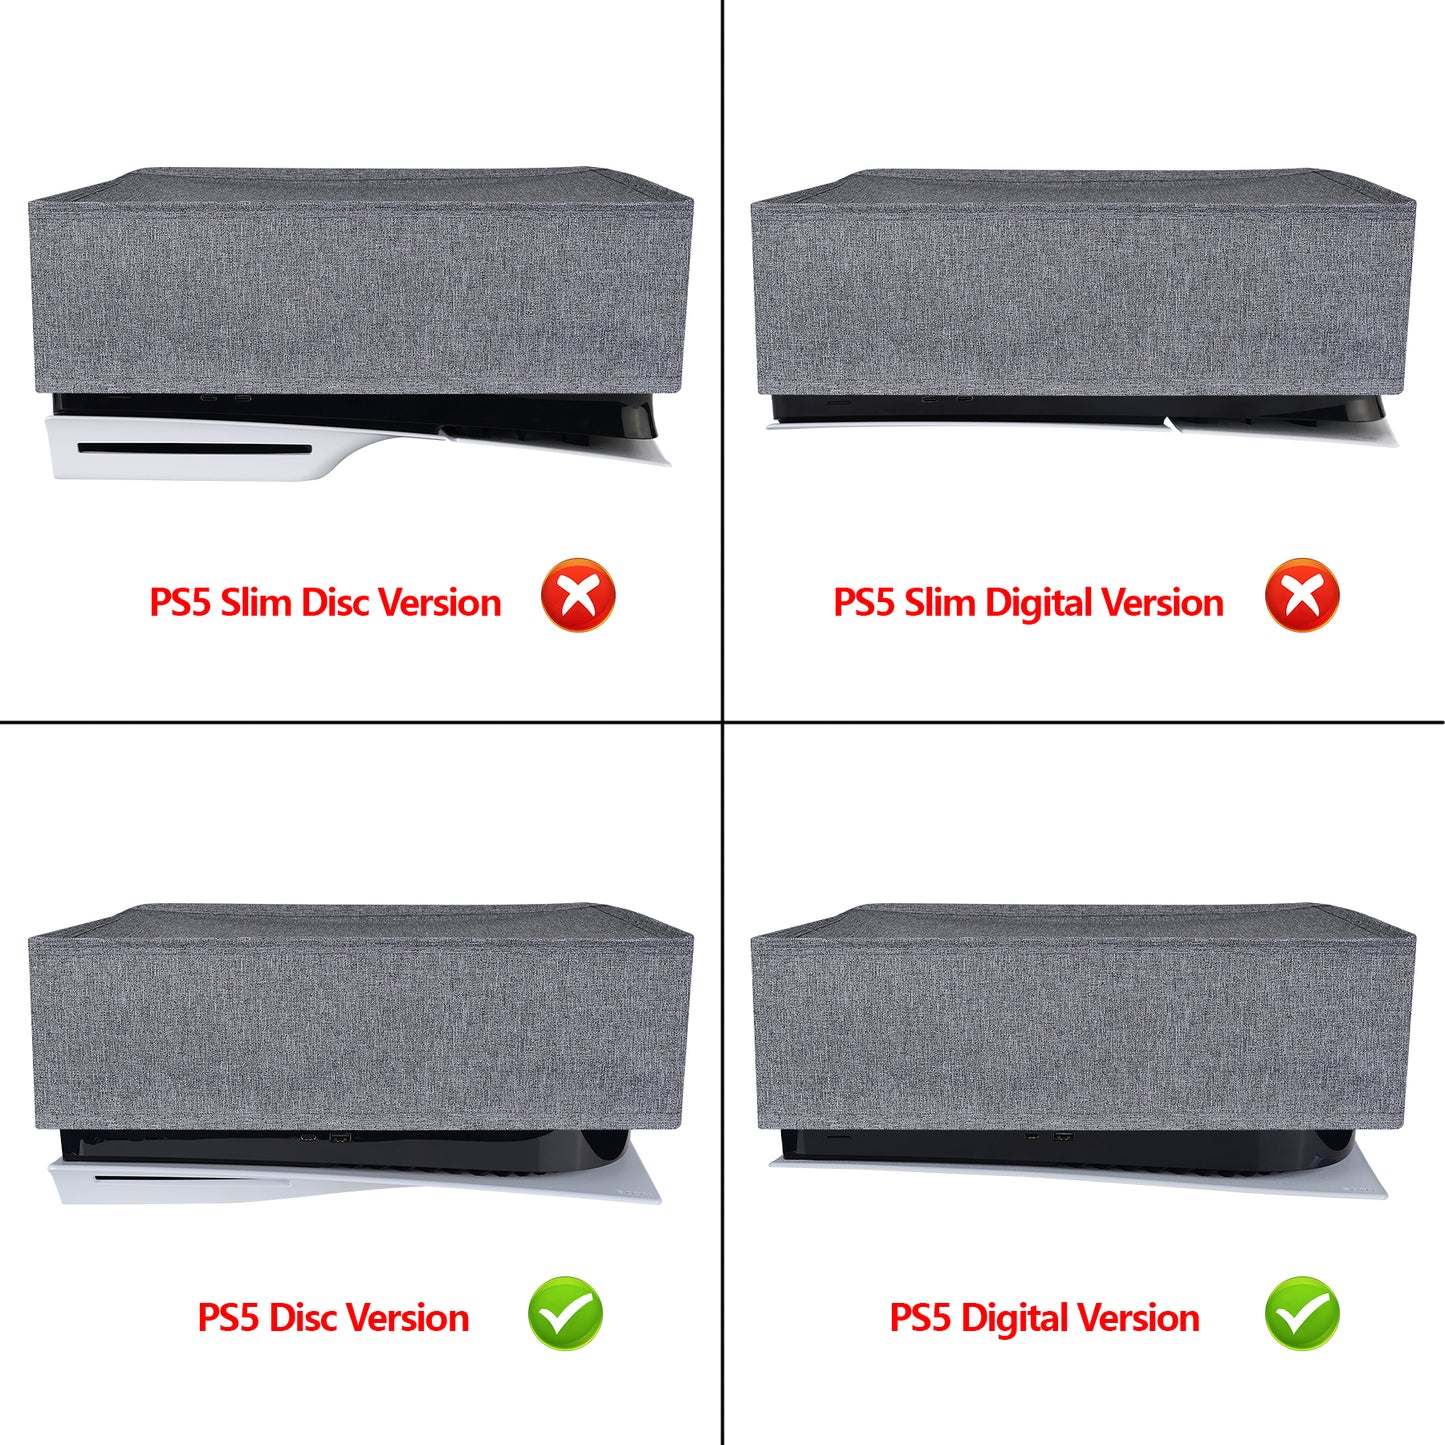 PlayVital Gray Nylon Horizontal Dust Cover, Soft Neat Lining Dust Guard for PS5 Console, Anti Scratch Waterproof Cover Sleeve for PS5 Console Digital Edition & Disc Edition - PFPJ083 PlayVital